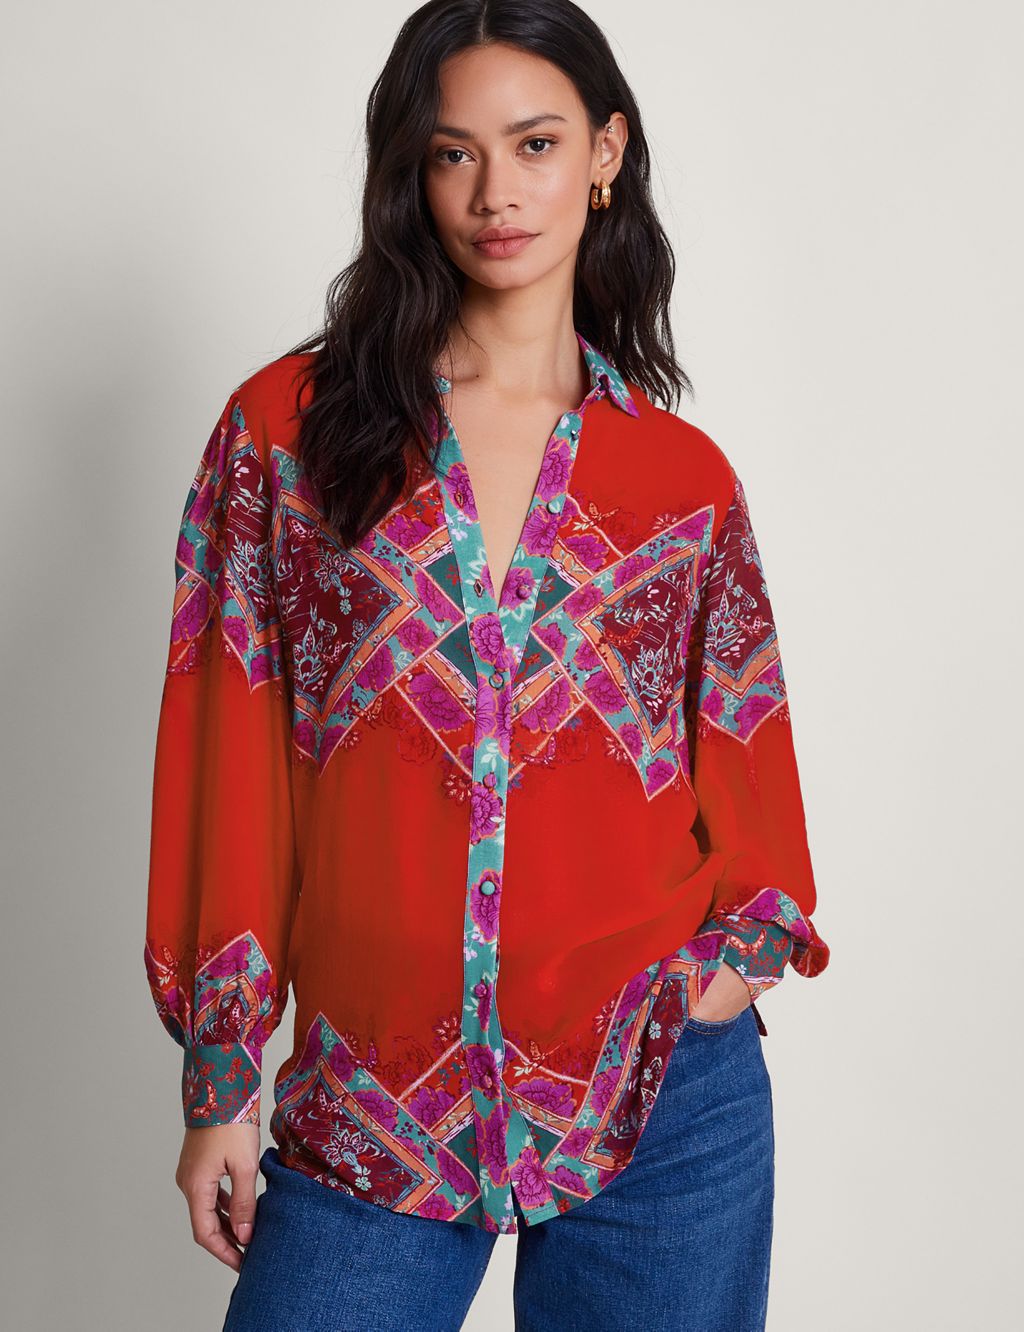 Women's Shirts, Tops & Blouses in Red